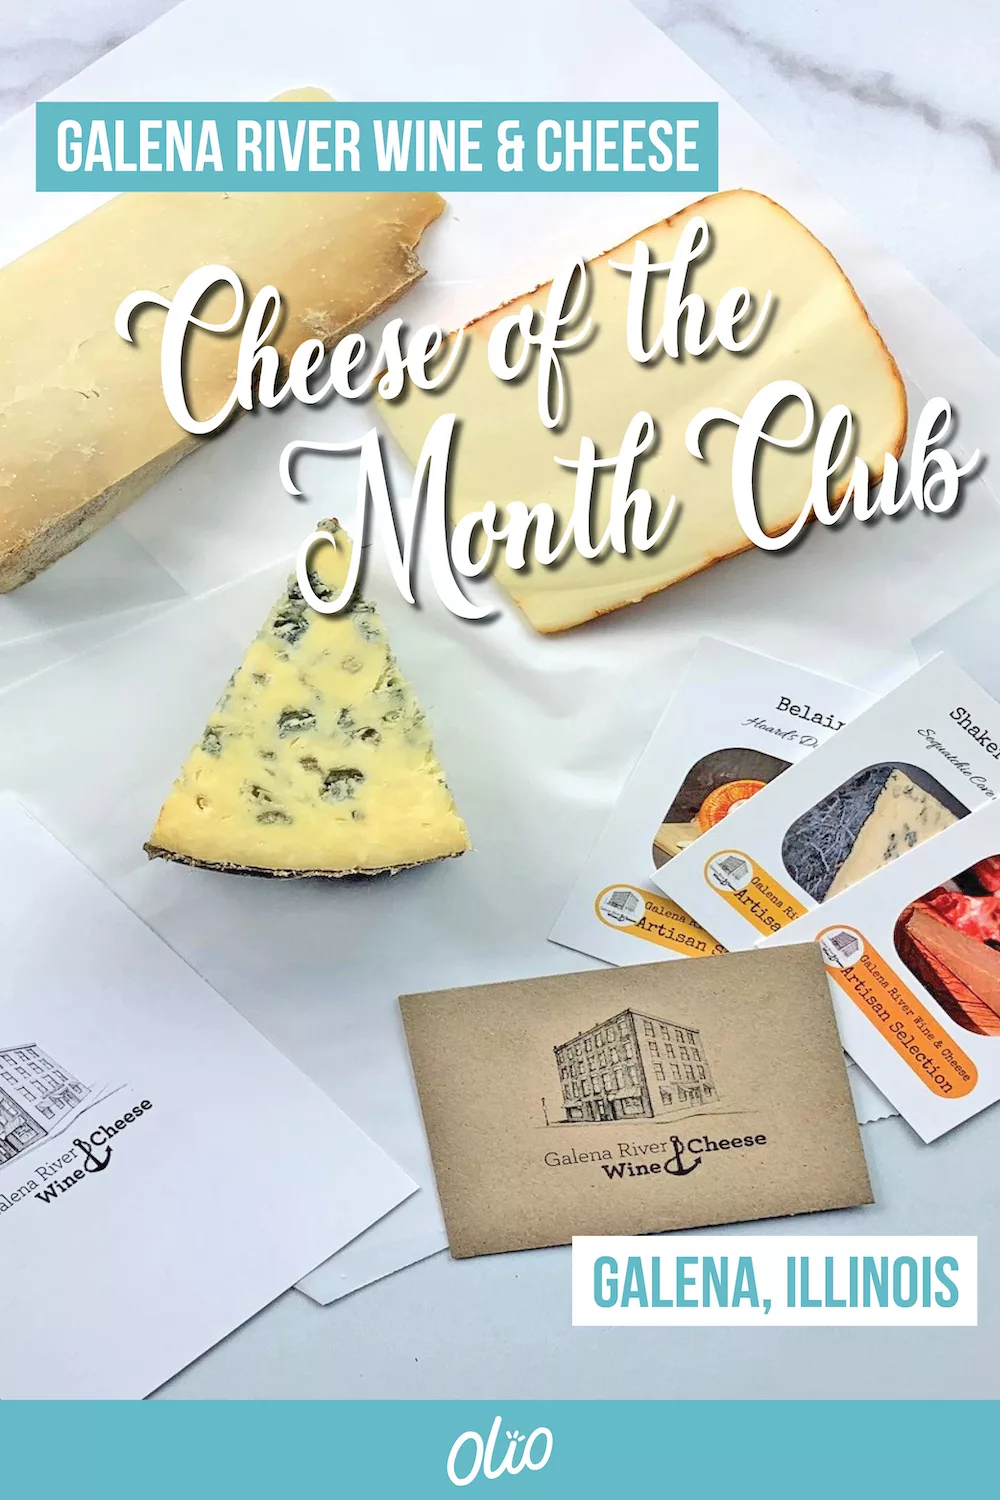 Whether you're shopping for a Midwest gift or just want to treat yourself, a Cheese of the Month Club box from Galena River Wine & Cheese is the perfect option! Enjoy hand selected cheeses from this shop in Galena, Illinois and support a small business in the process. #Midwest #Illinois #foodie